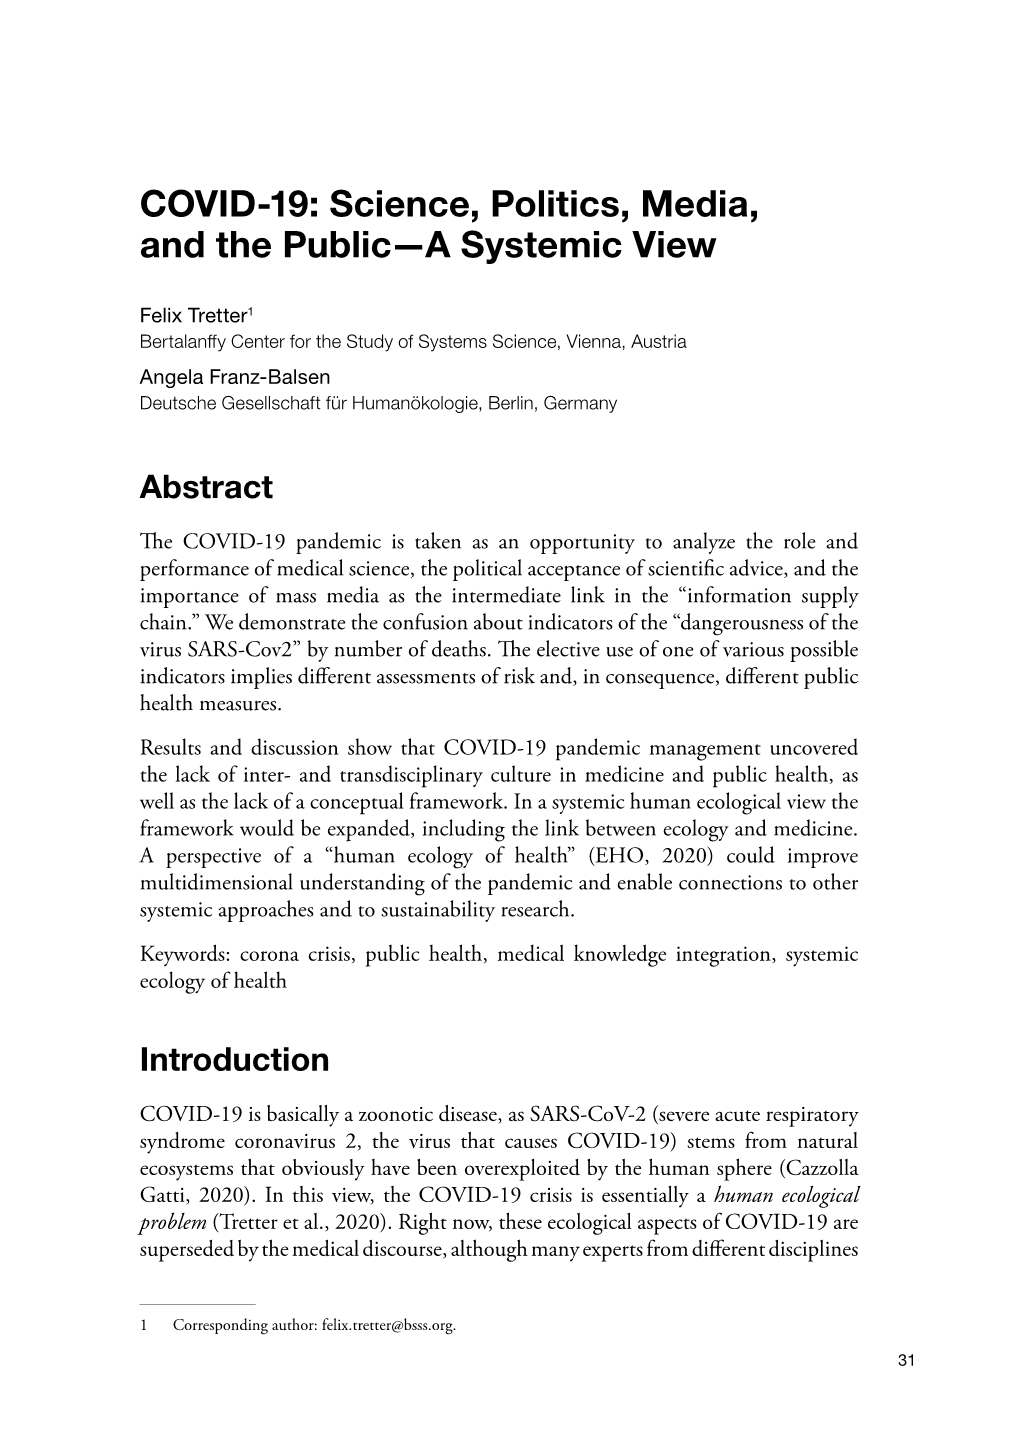 COVID-19: Science, Politics, Media, and the Public—A Systemic View